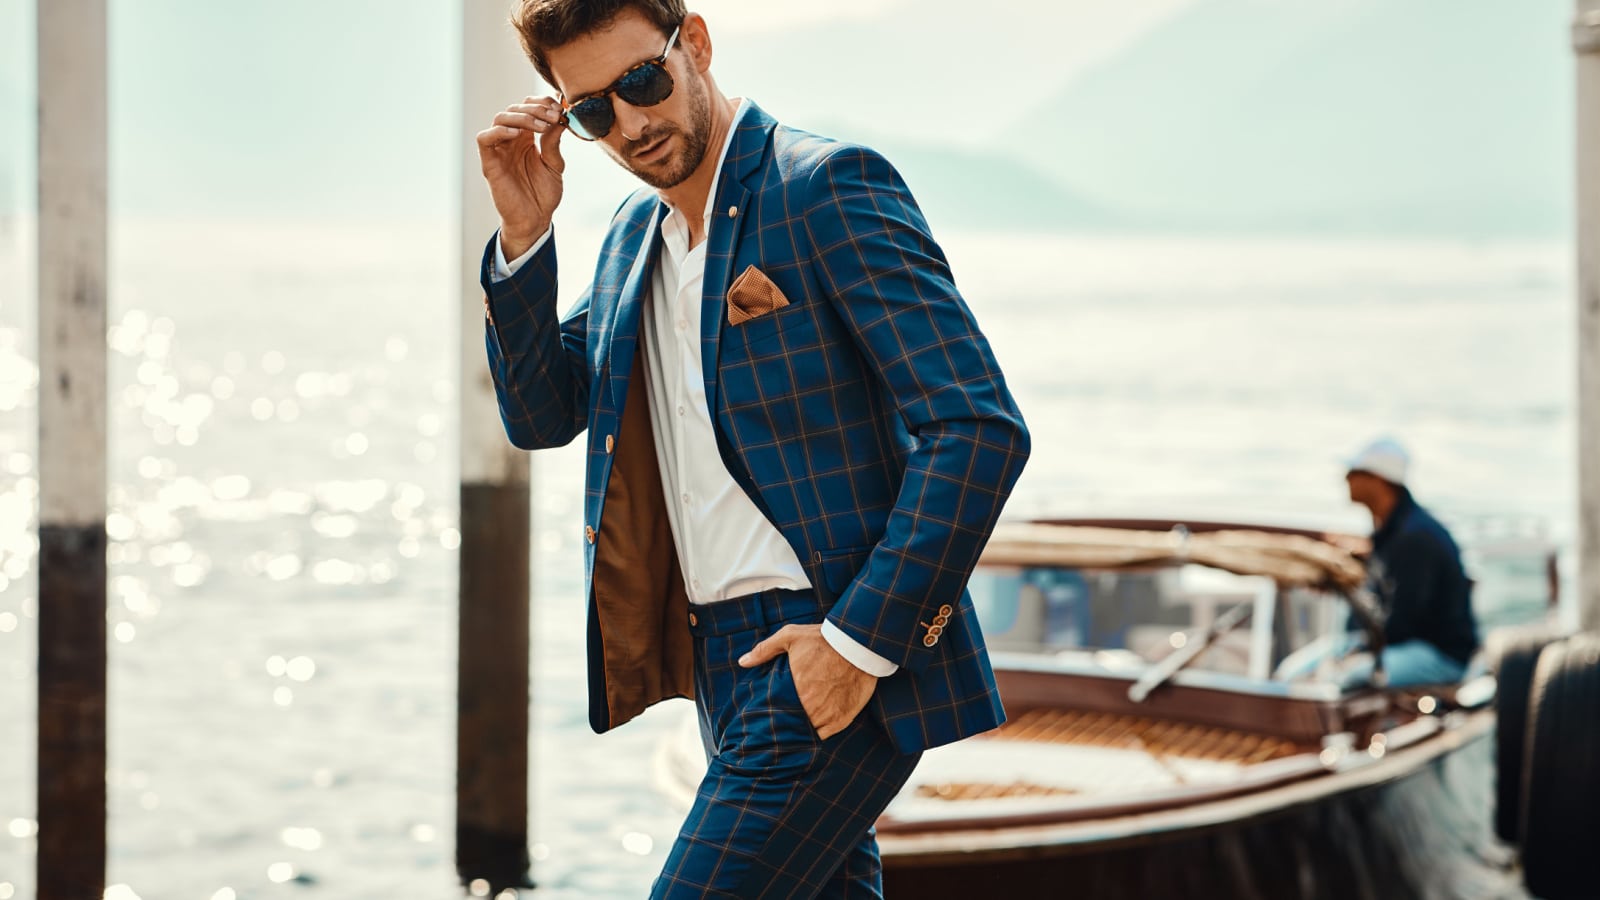 Young handsome man in classic suit wear sunglasses over the blurred lake